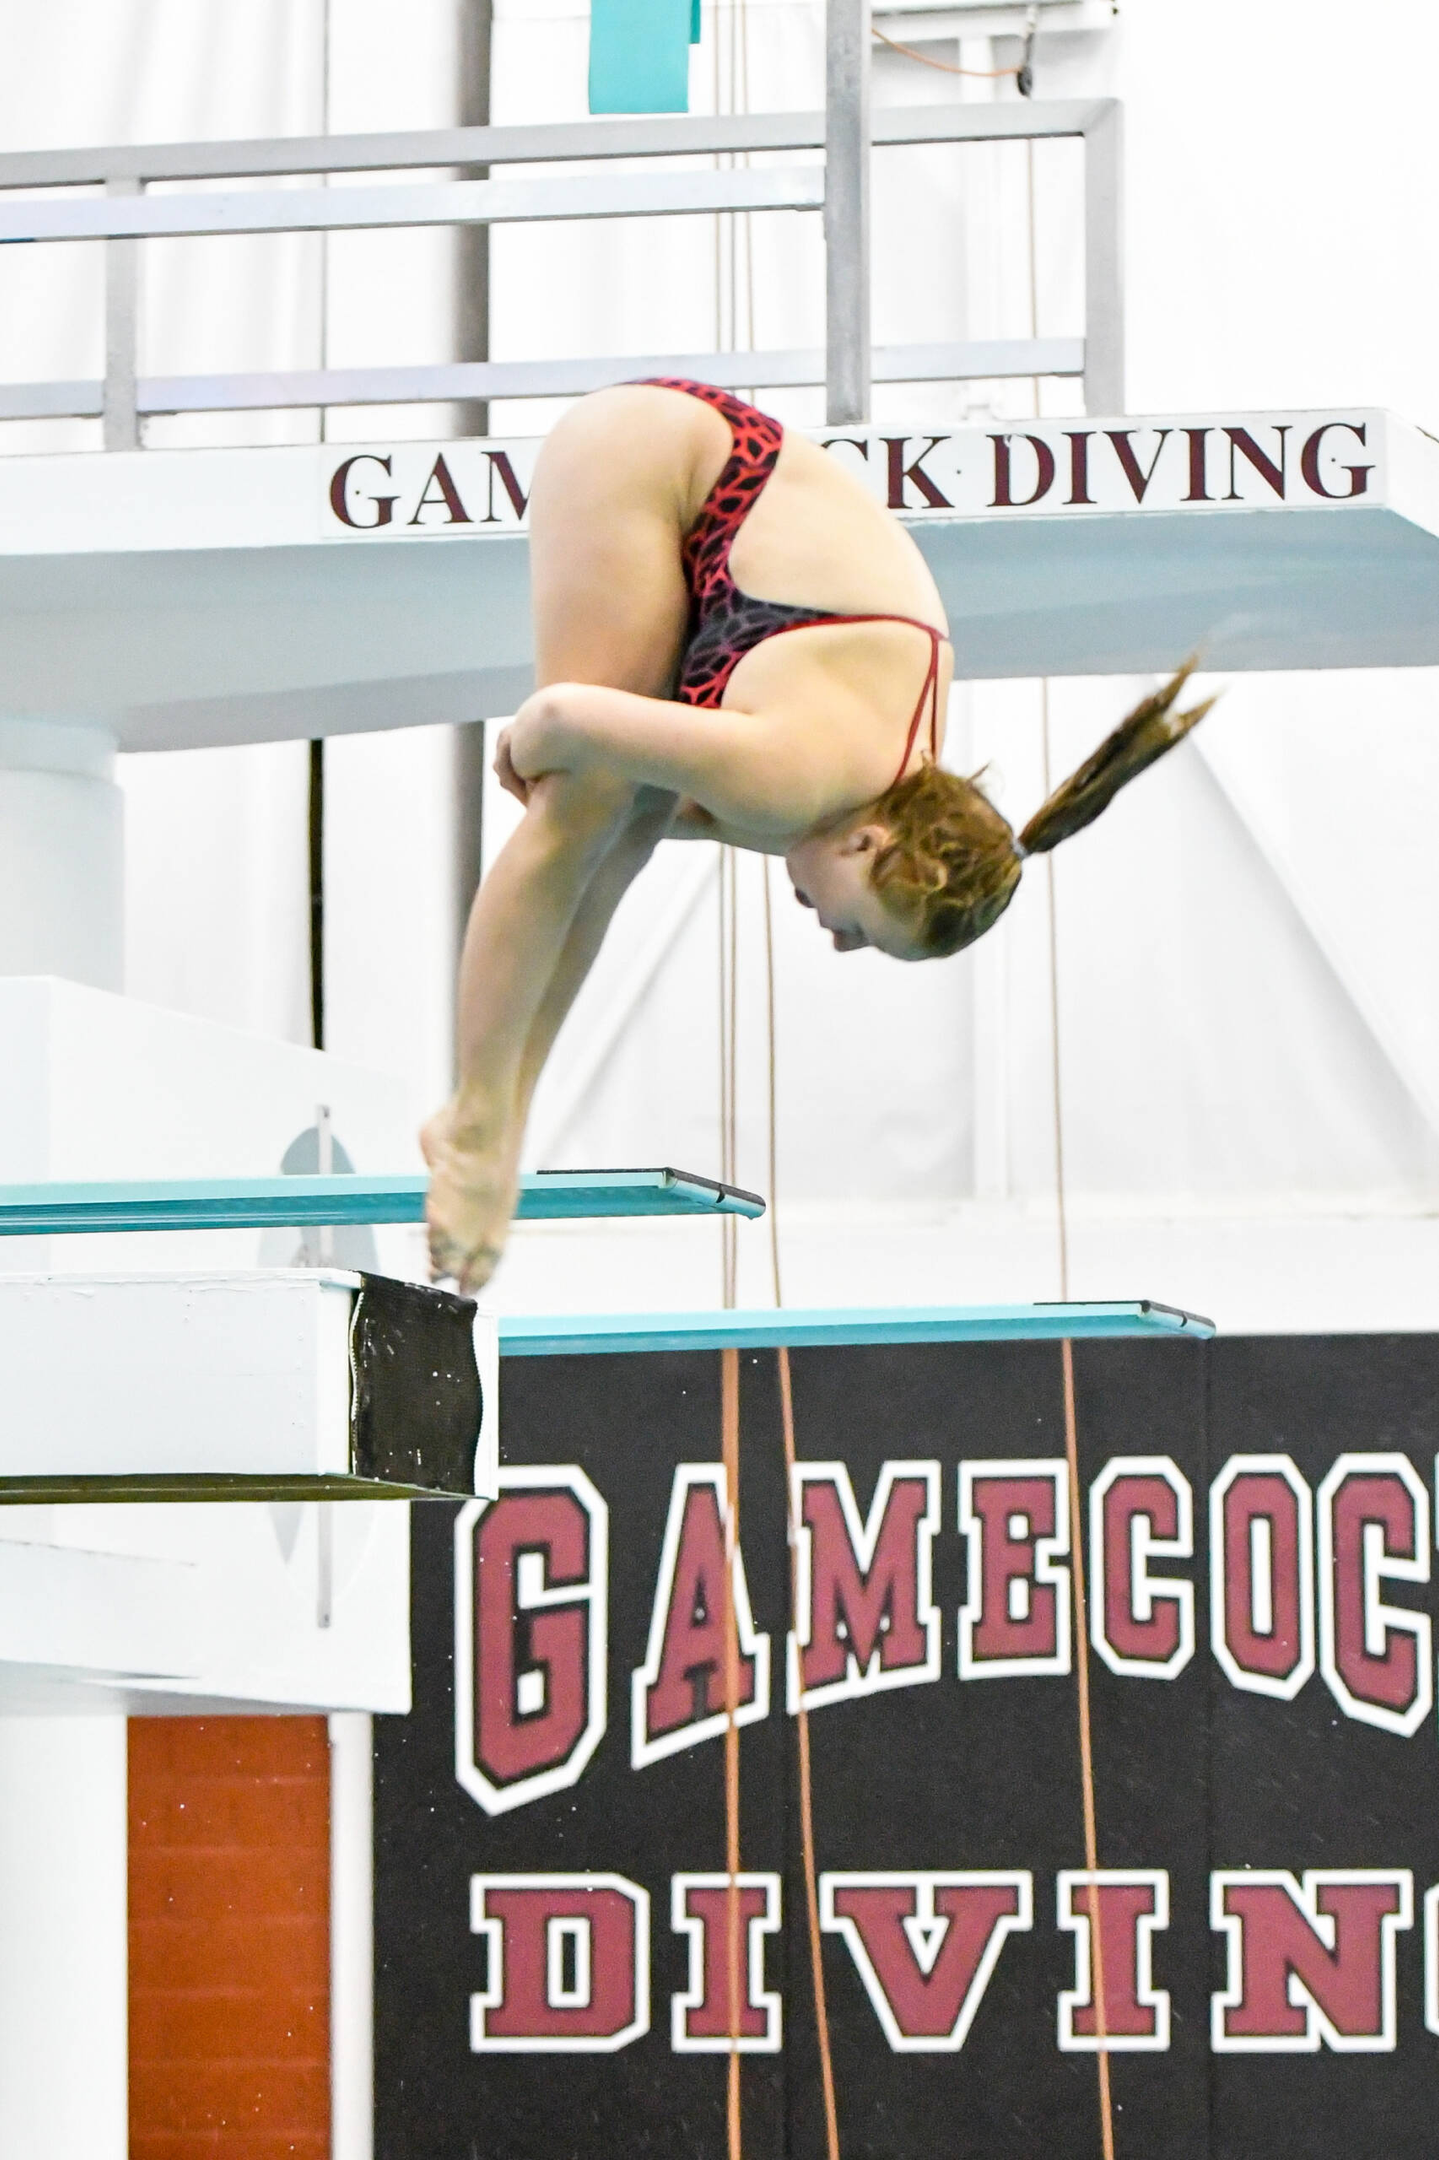 LUJAN PLACES SIXTH IN WOMEN'S PLATFORM AT ZONE B CHAMPIONSHIPS